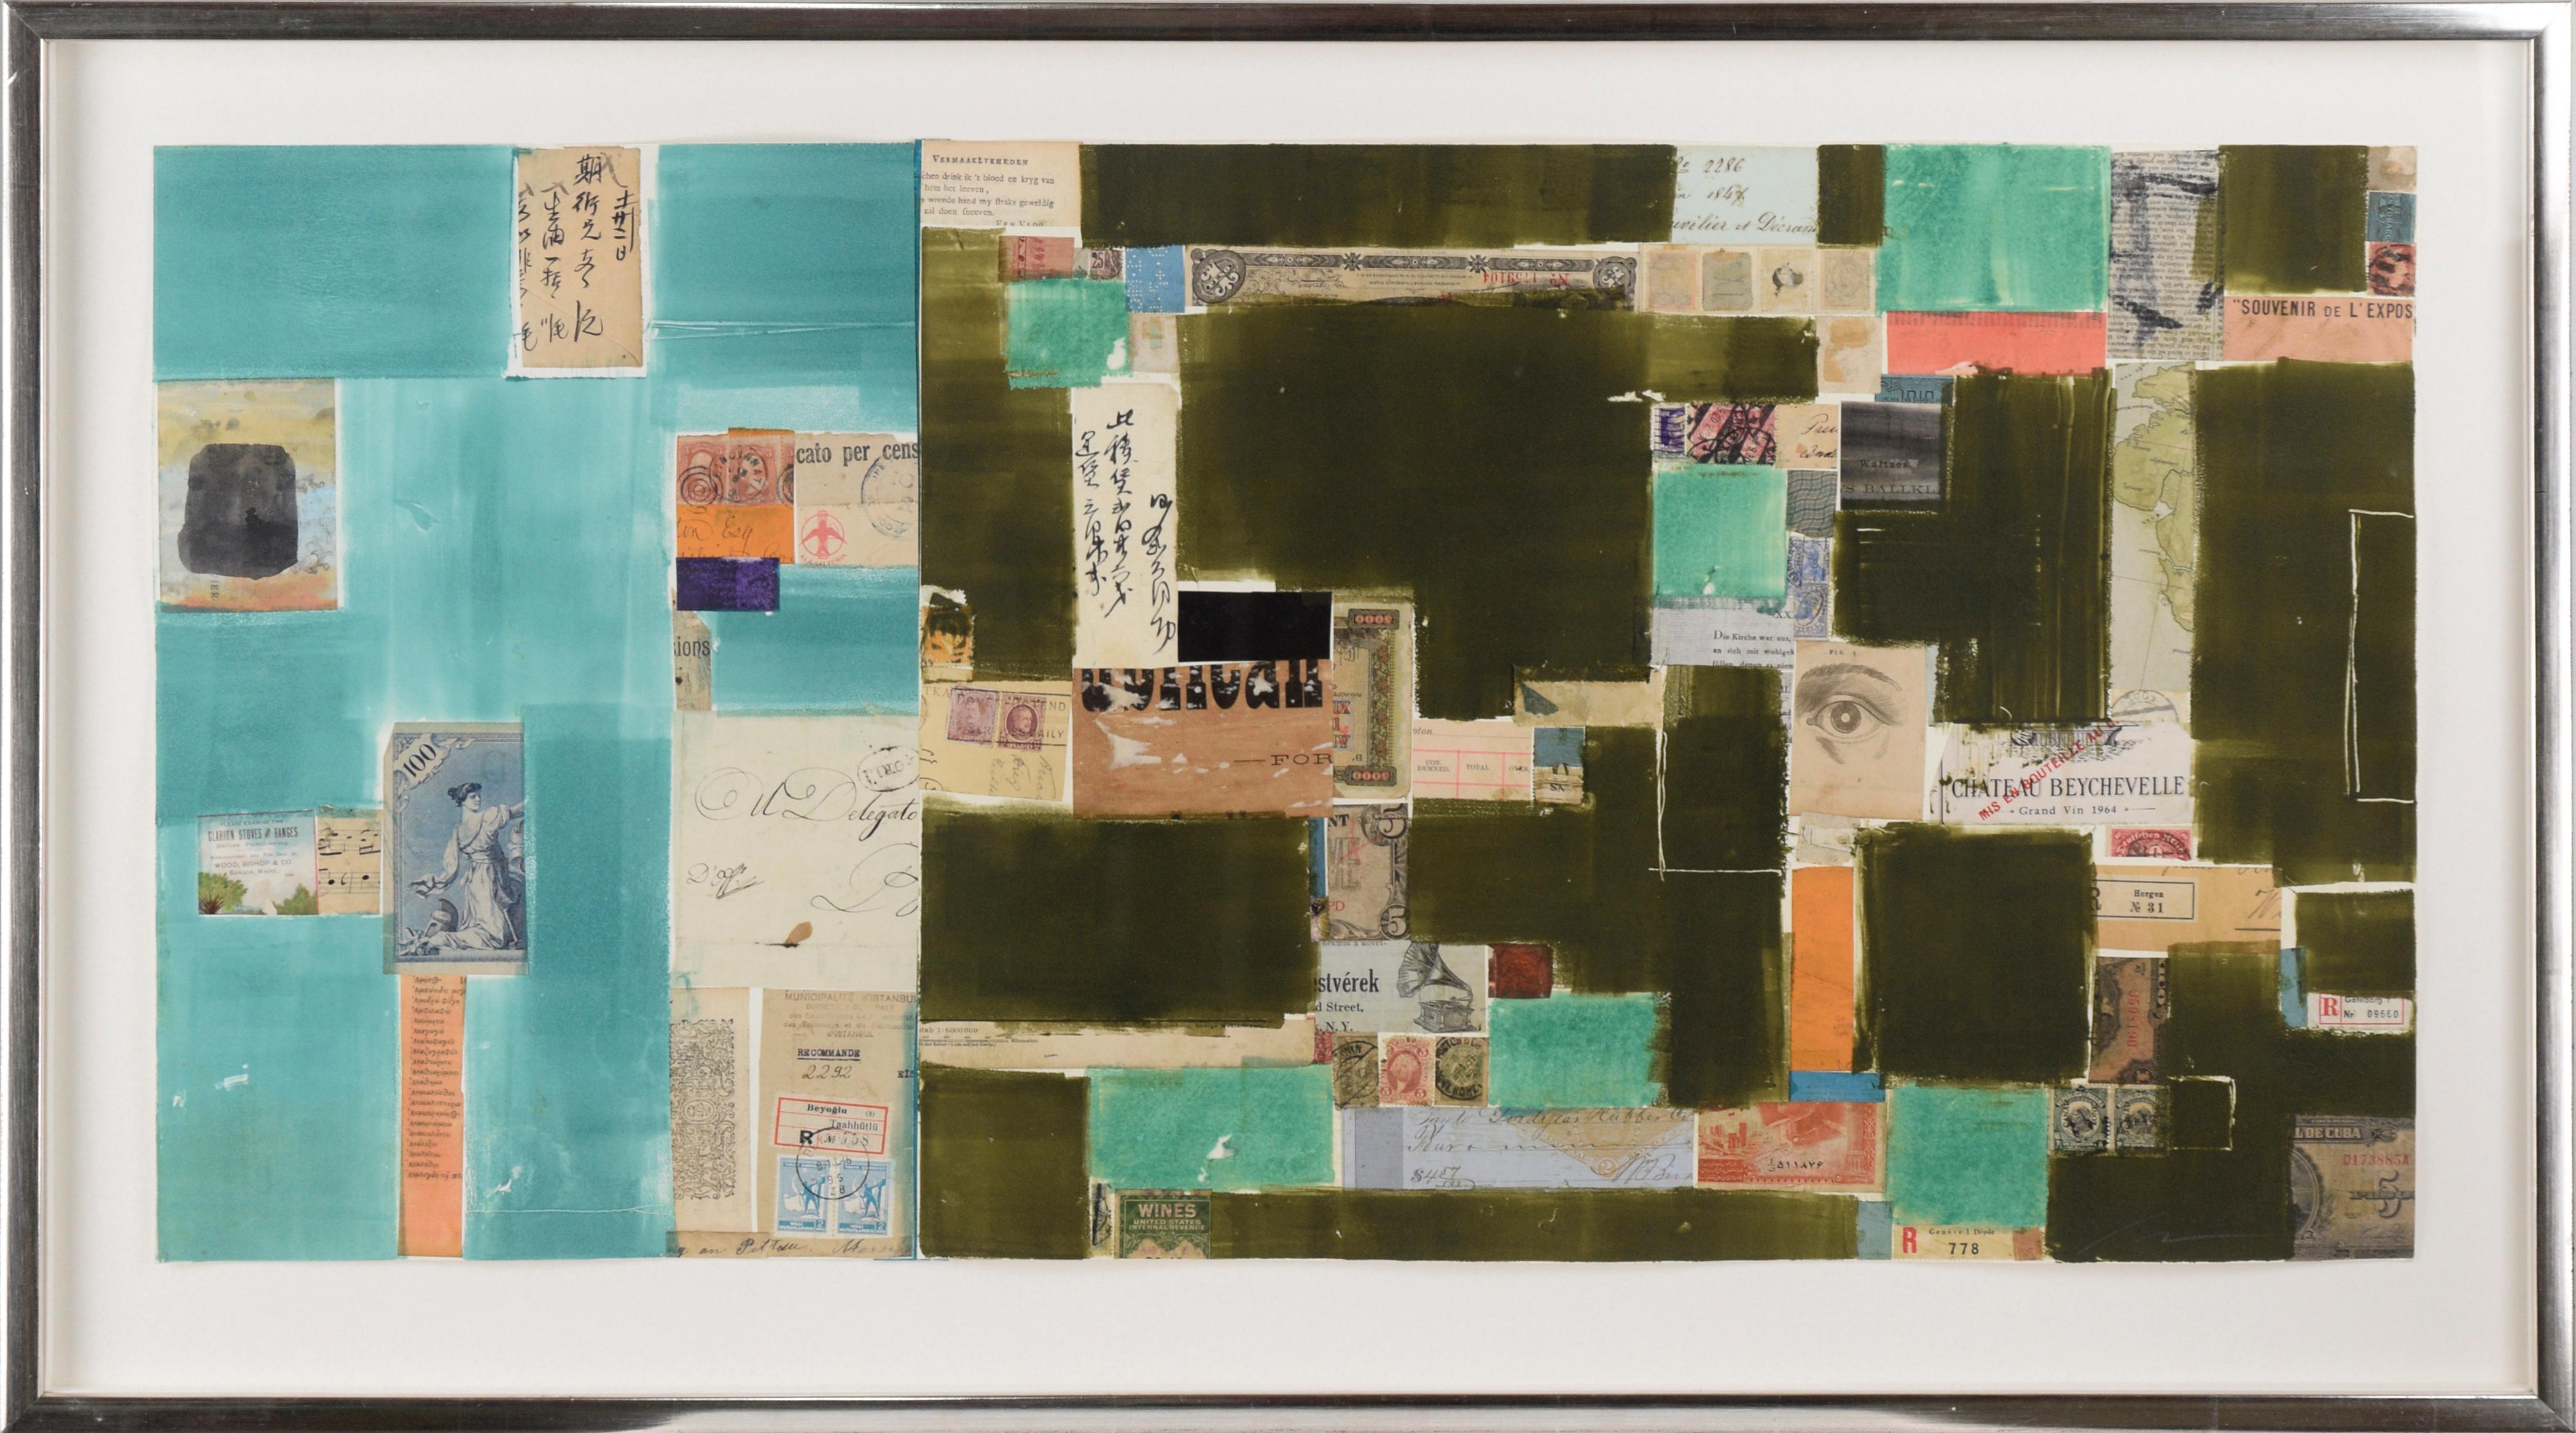 Michael Pauker  Abstract Drawing - "Taahhutlu" Monotype with Chine Colle and Watercolor, Found Object Collage